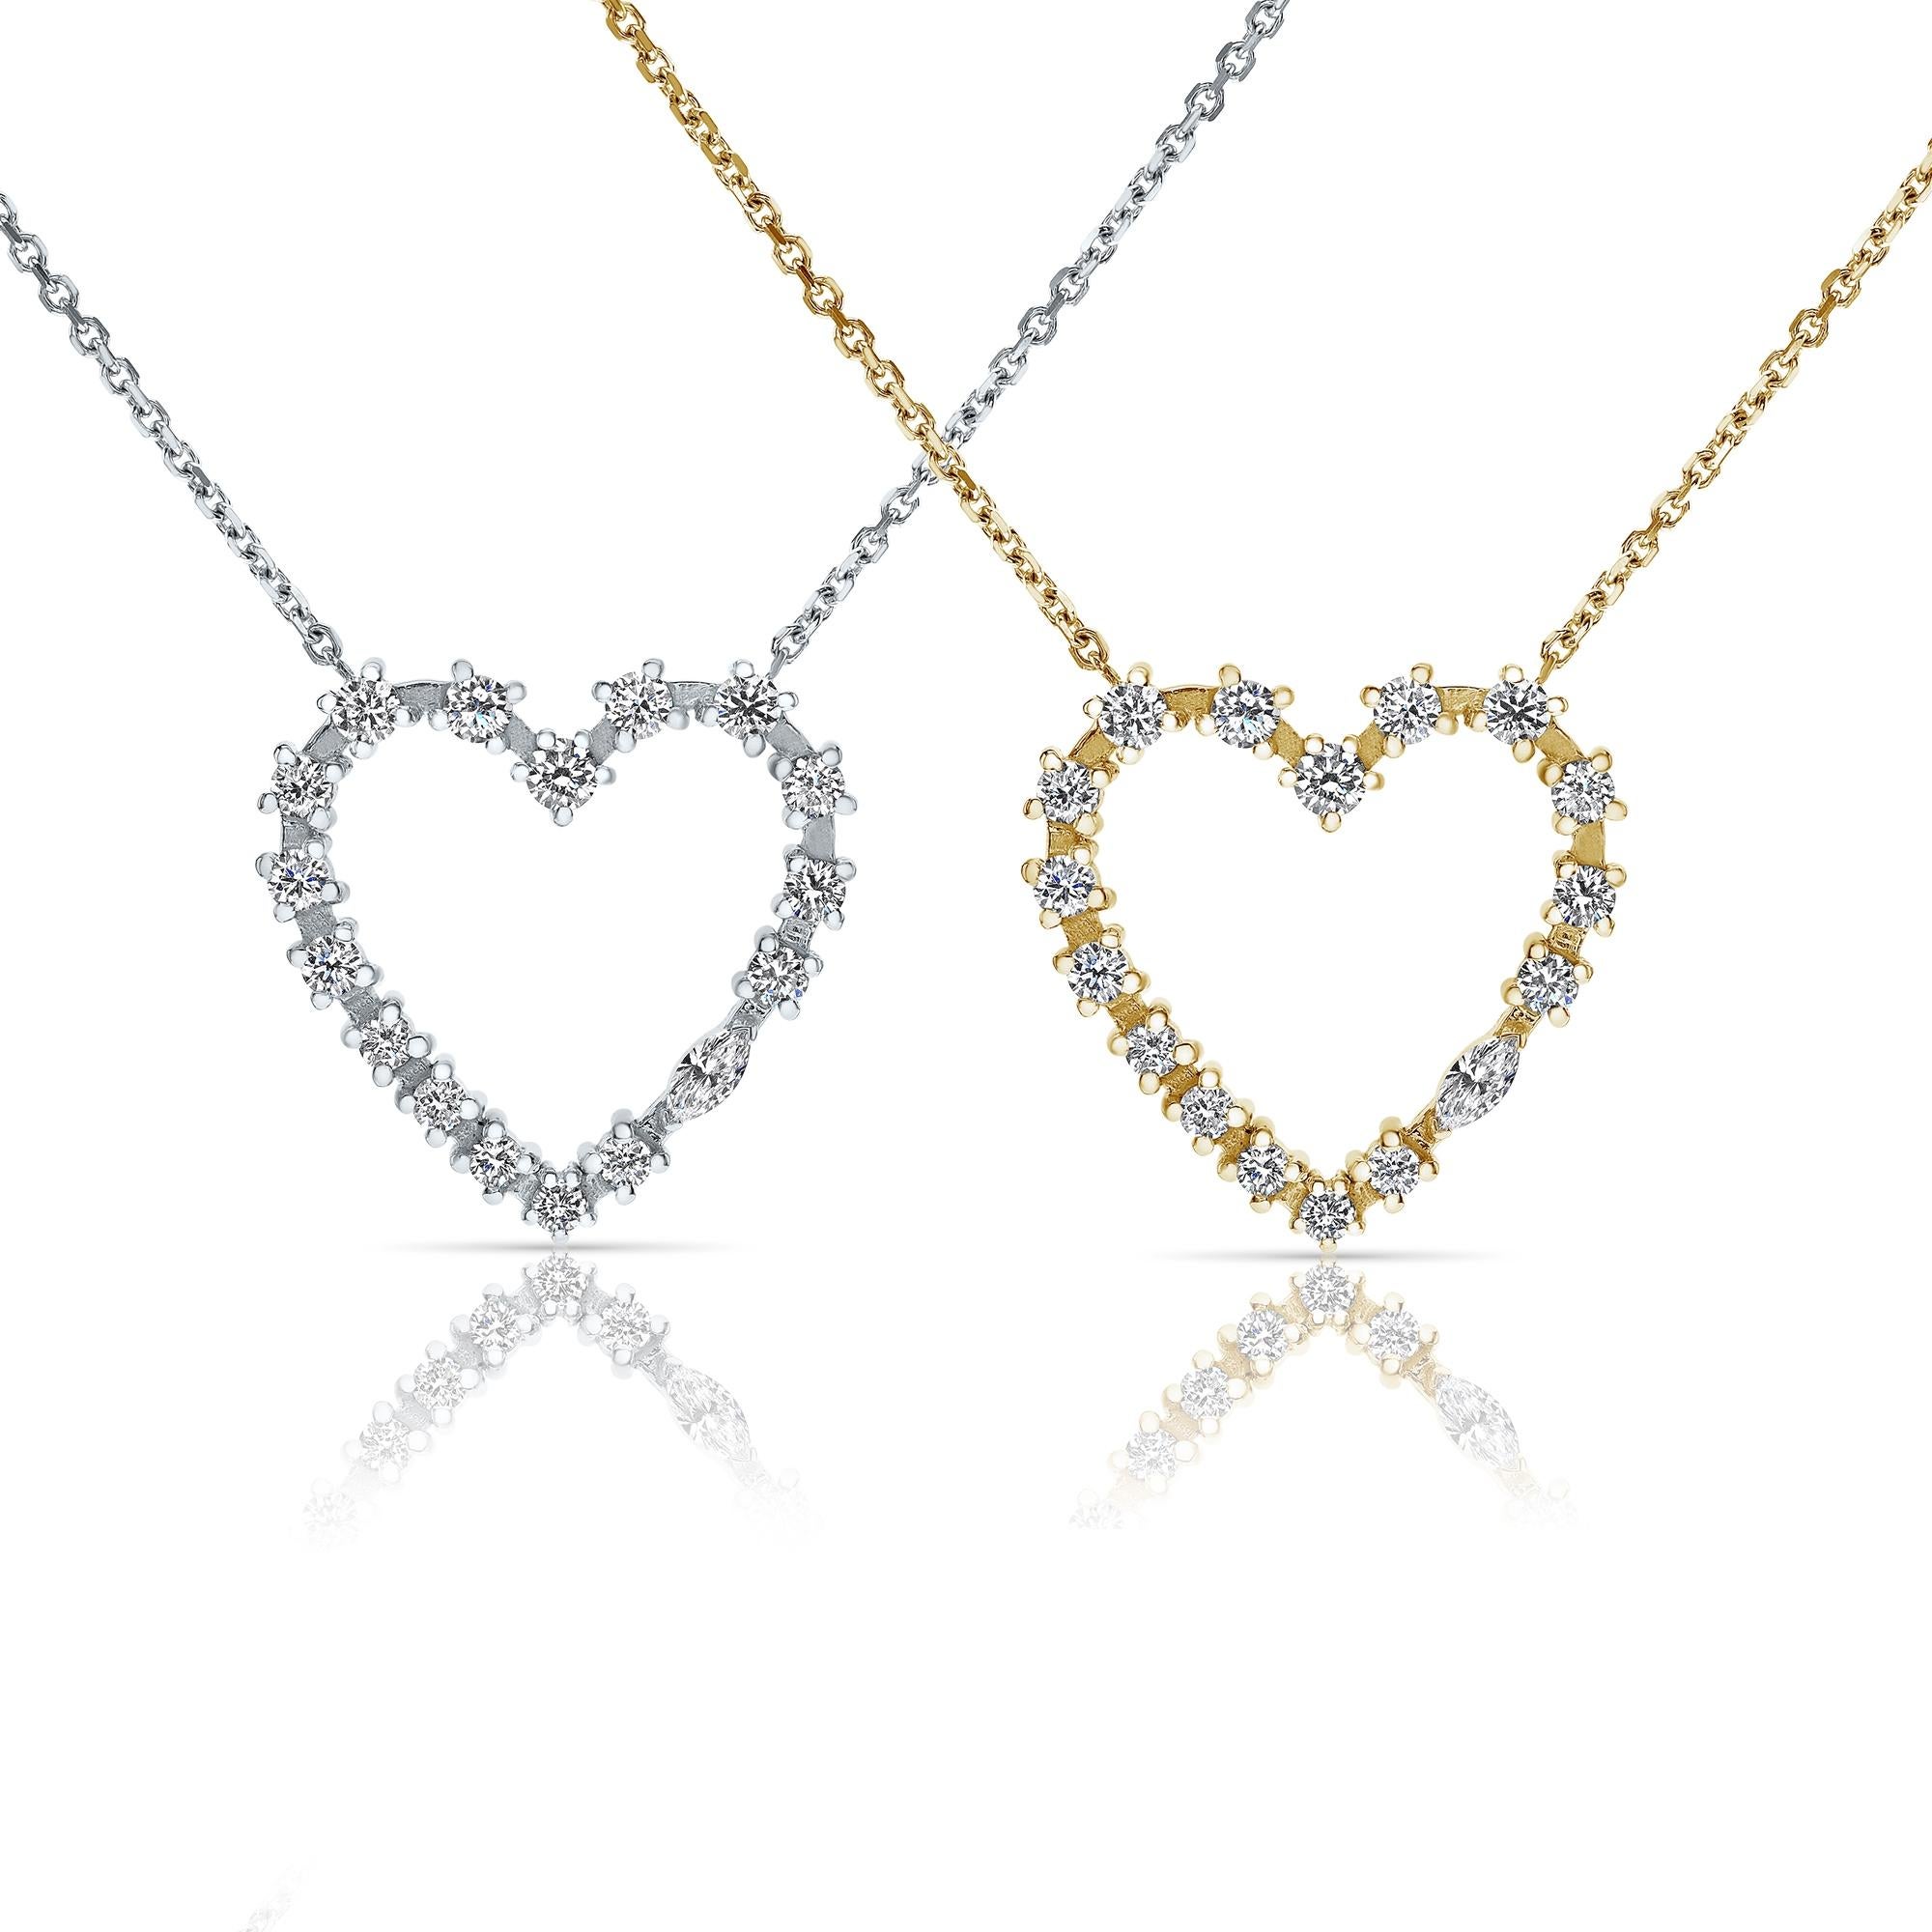 14K Yellow Gold 0.37 Carat Heart Shaped Diamond Pendant Necklace - Shlomit Rogel

Beautiful heart shaped diamond pendant from Cupid's Kiss collection, set with 18 stunning real diamonds. Can you spot the hidden marquise diamond among these beautiful